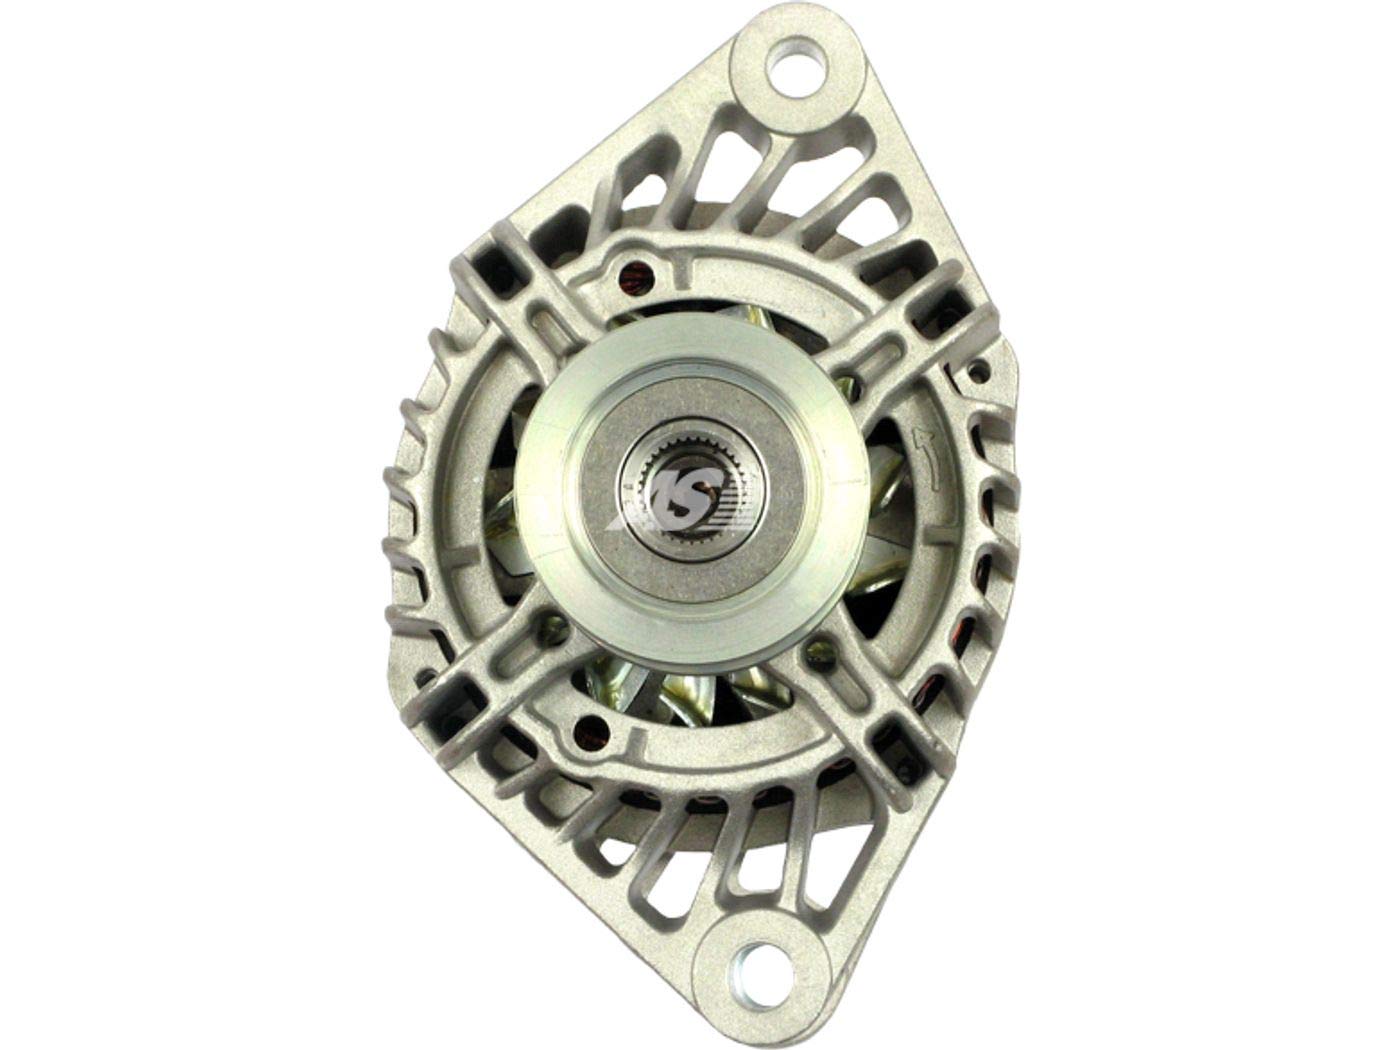 Brand new AS-PL Alternator with INA Free Wheel Pulley - A4043(P-INA) von AS-PL